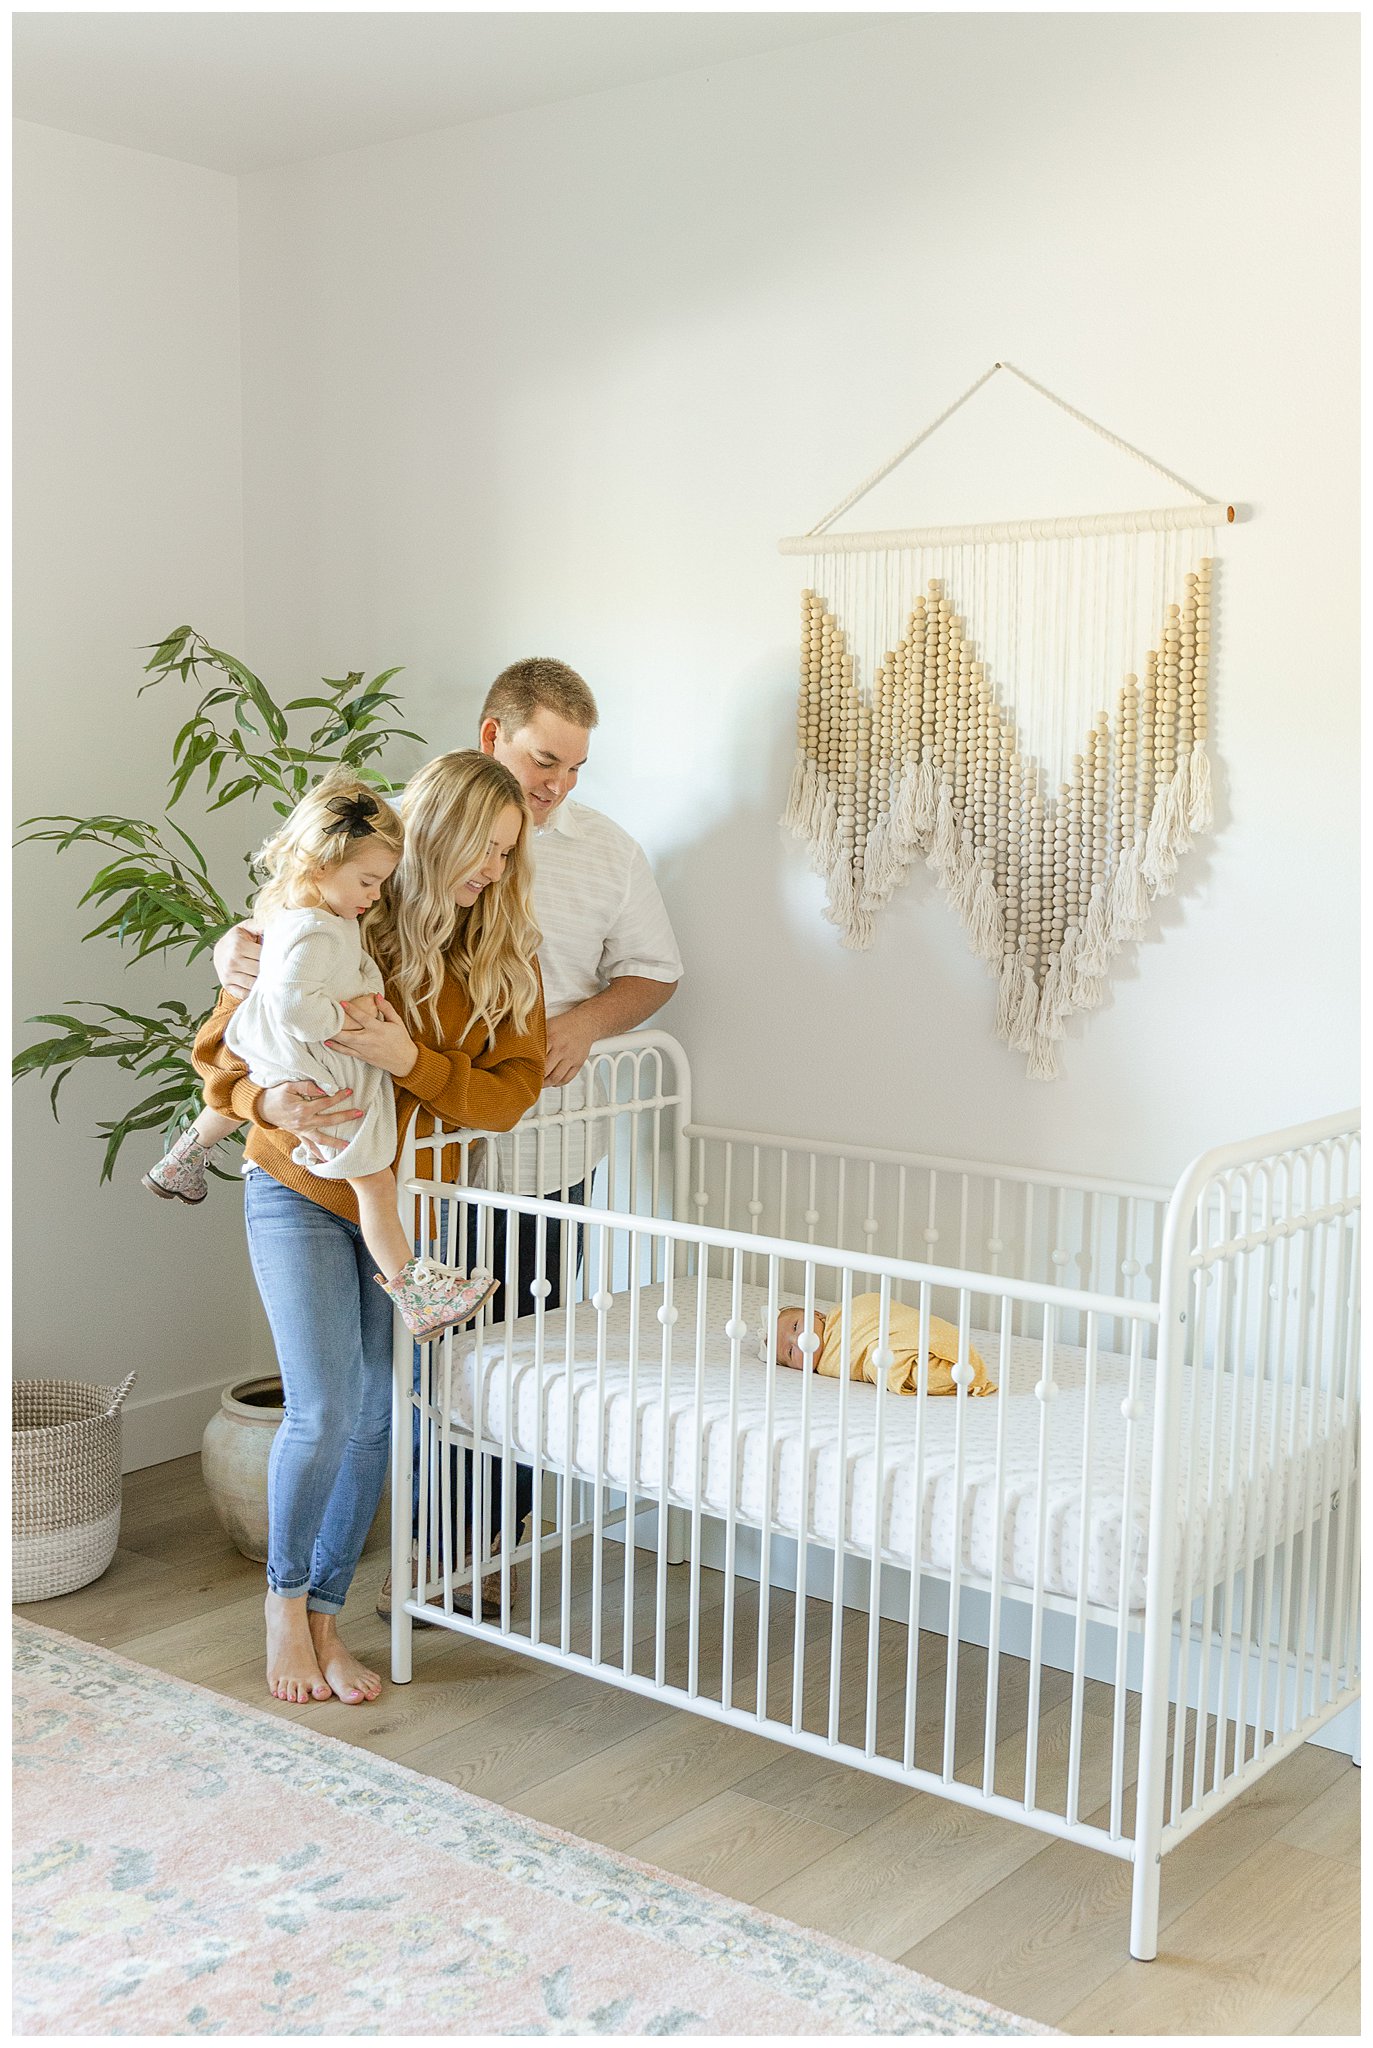 Baby Makes Four Family Adoring Newborn in Crib | Heather + Danny